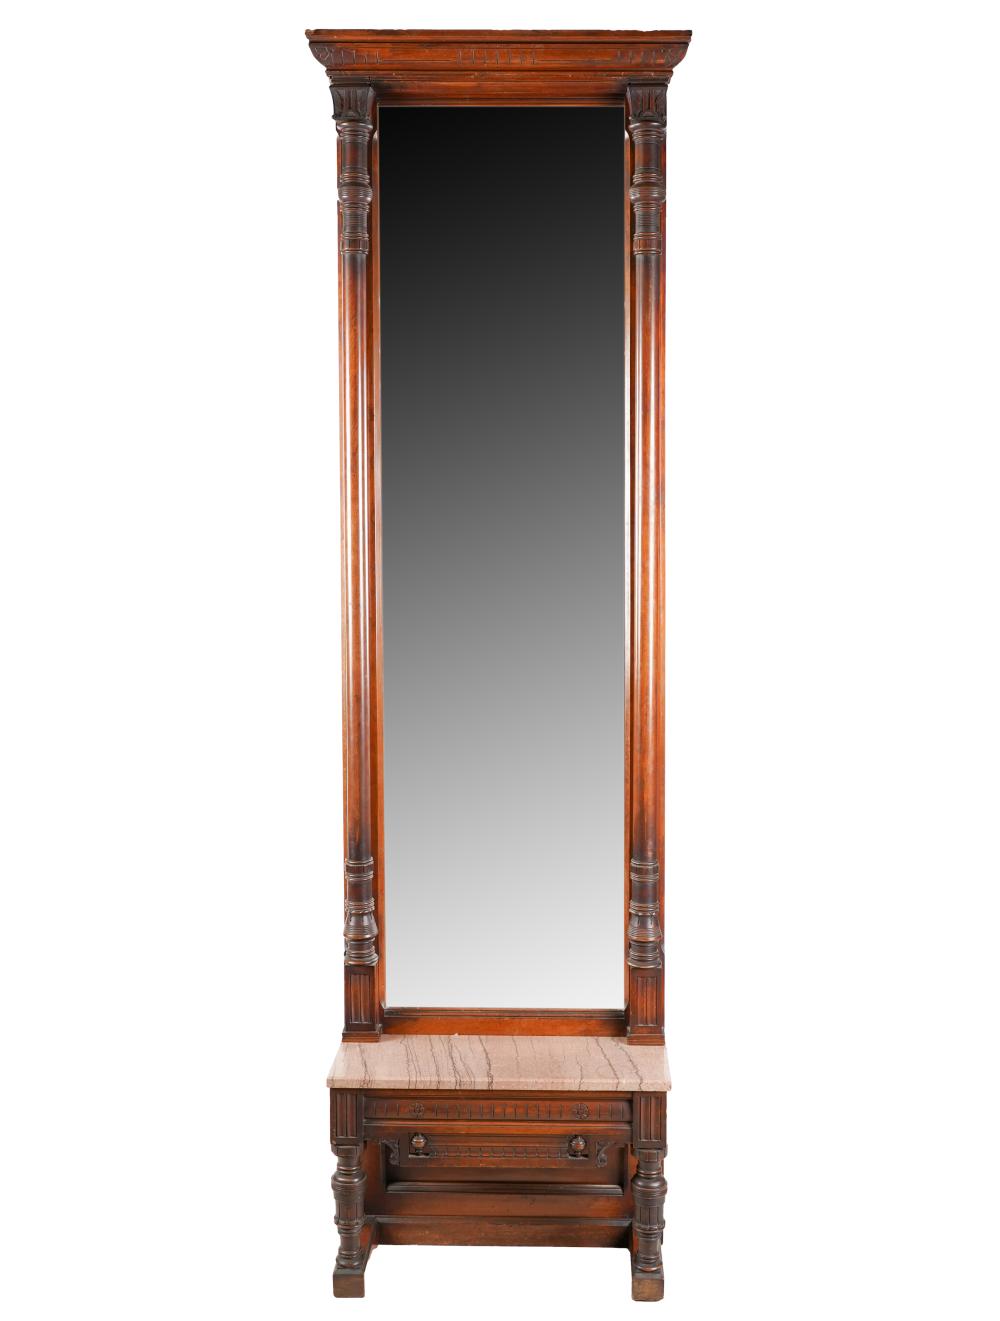 EASTLAKE CARVED MAHOGANY PIER MIRRORwith